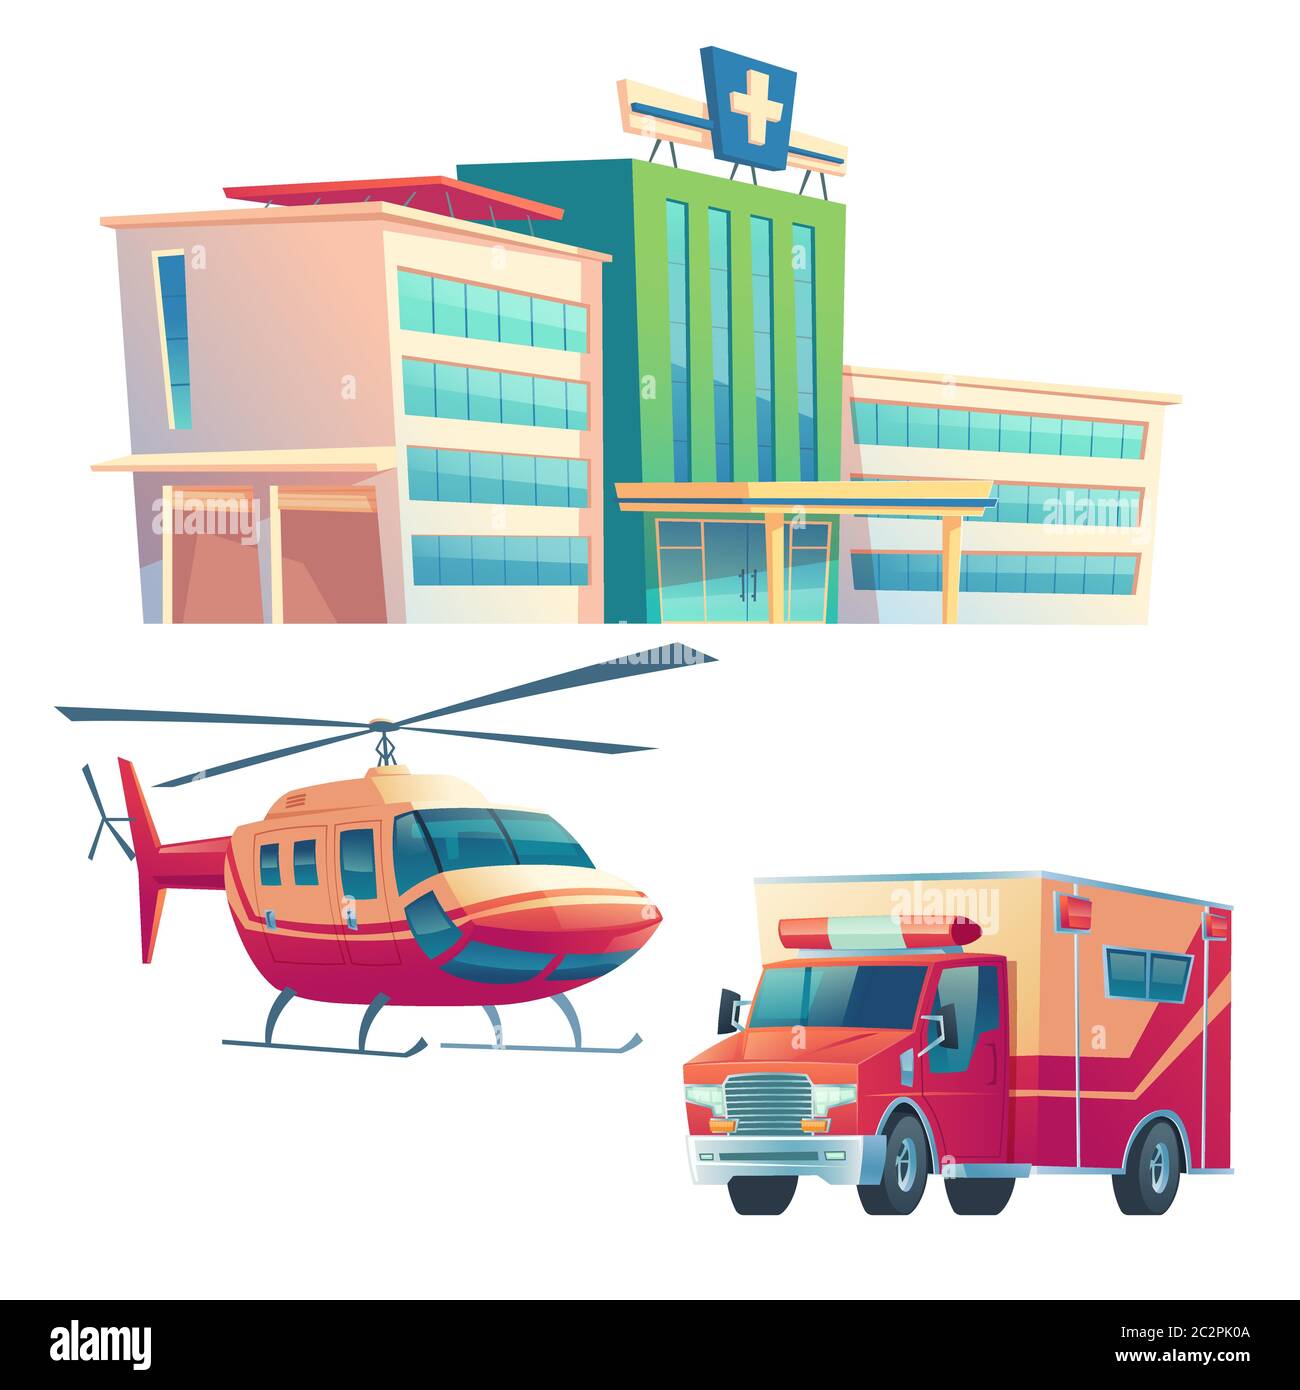 Hospital building, ambulance car and helicopter isolated on white background. Vector cartoon illustration of medical clinic, urgent first aid service, emergency rescue and ambulatory service Stock Vector